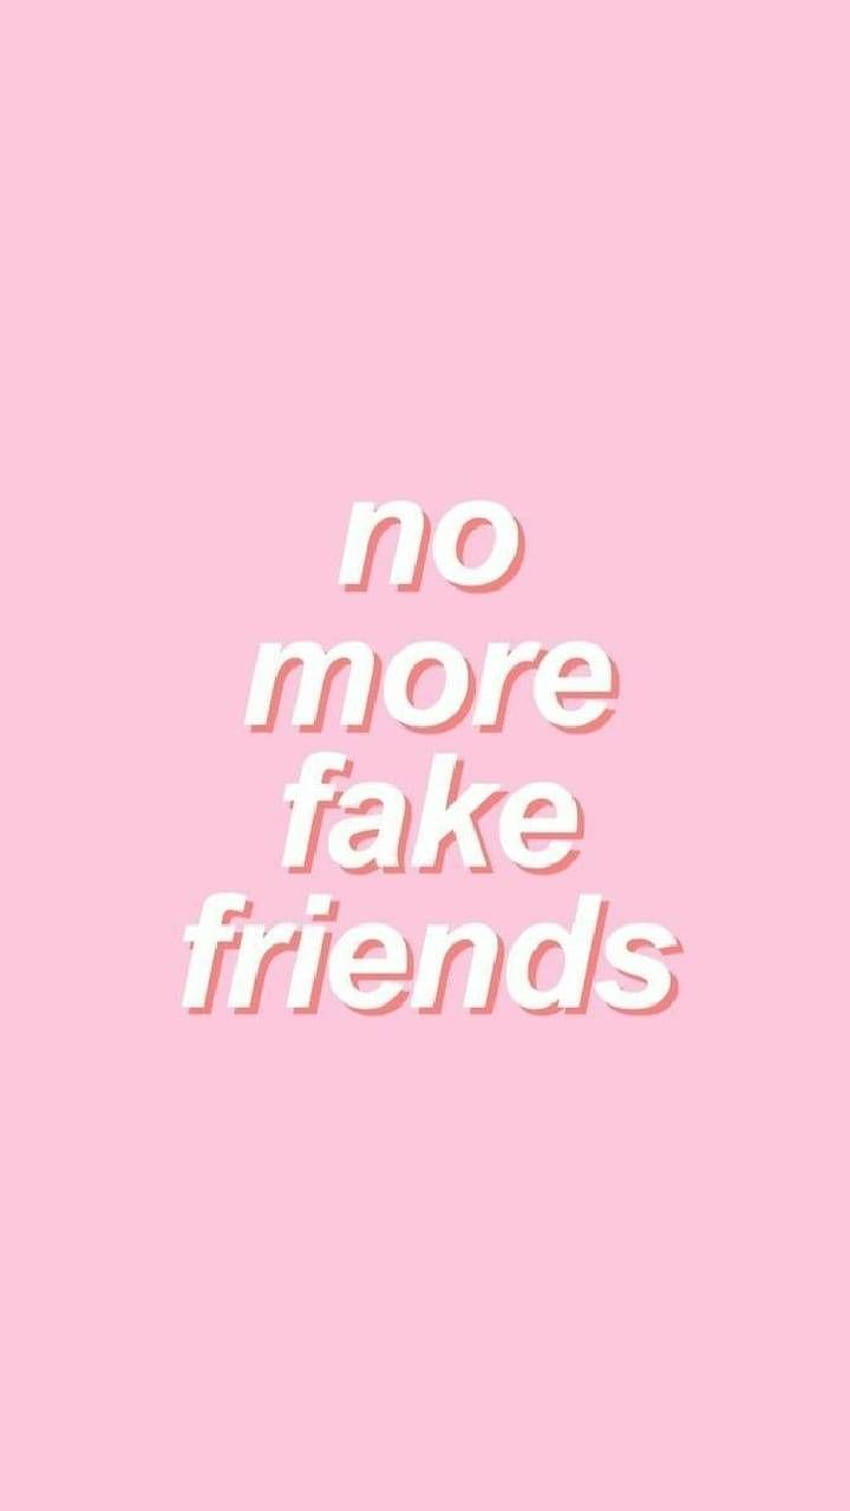 No more fake friends by Iloveunicor, i have no friends HD phone wallpaper